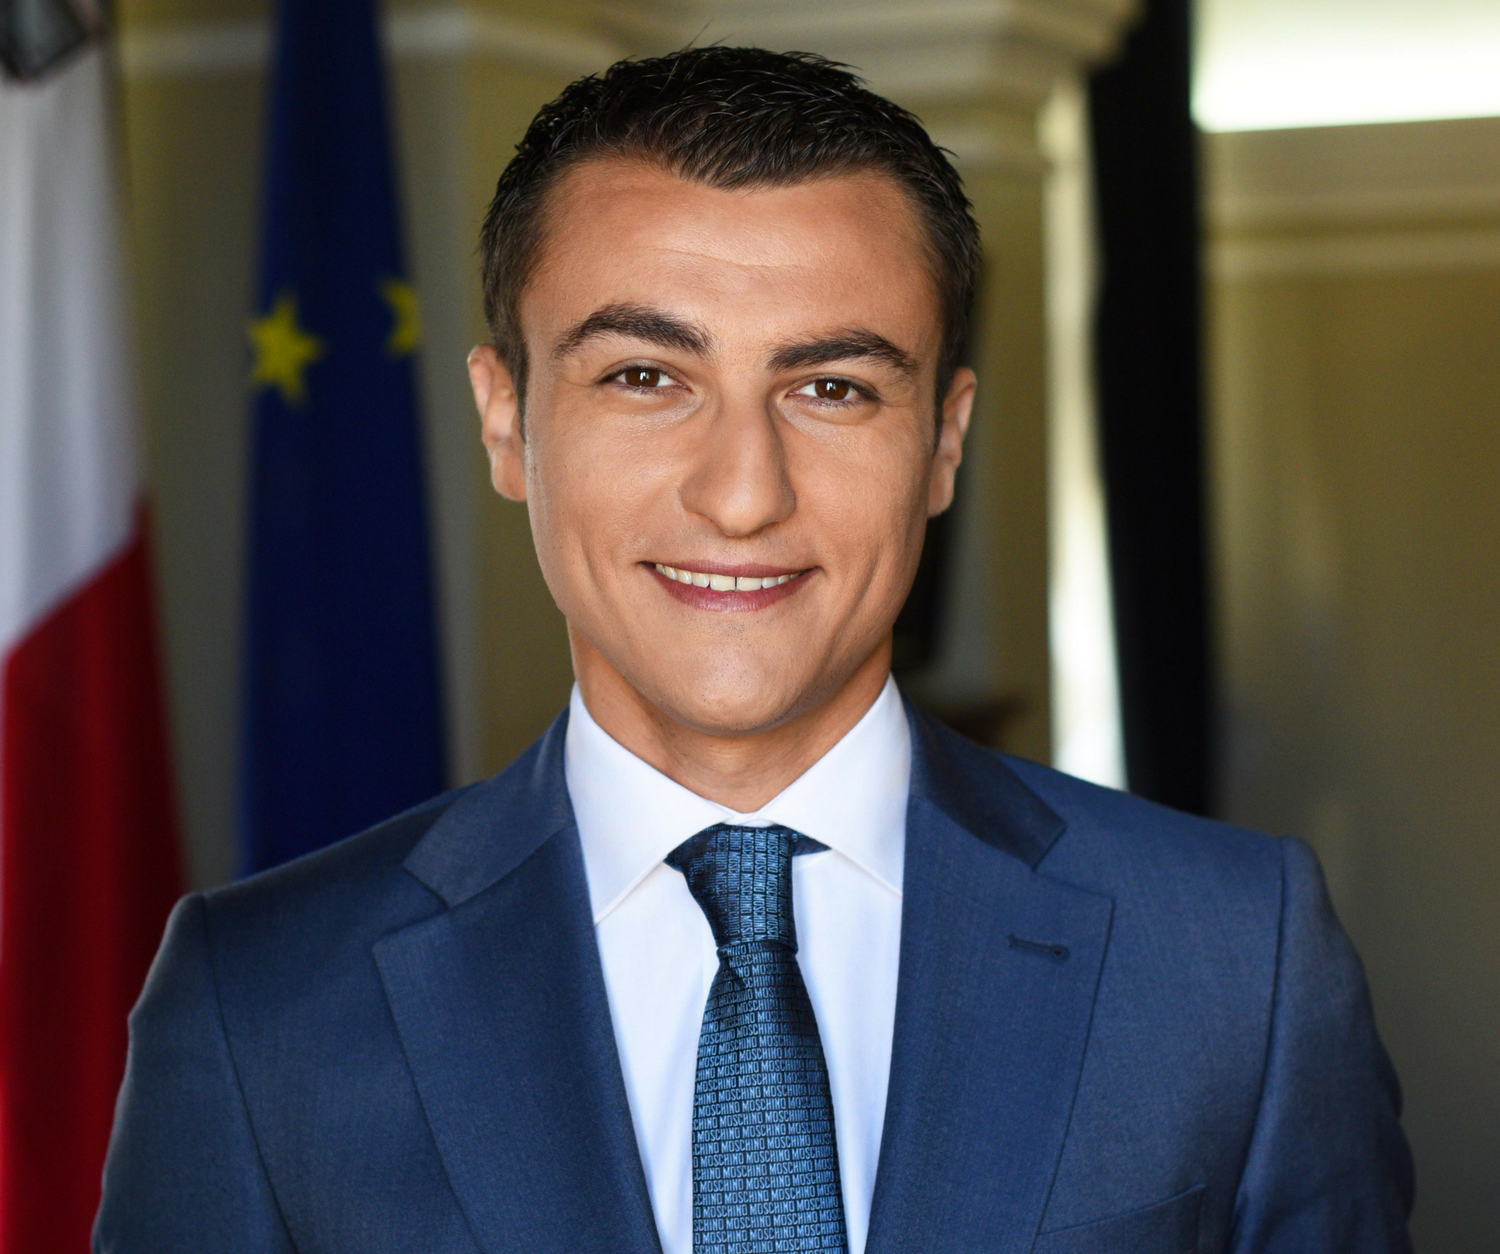 x Silvio Schembri - Fintech Conference Brussels Silvio Schembri  Parliamentary Secretary for Financial Services, Digital Economy and  Innovation, Government of Malta Hon. Silvio Schembri was born on the 16th  May 1985. He graduated with Honours and a ...